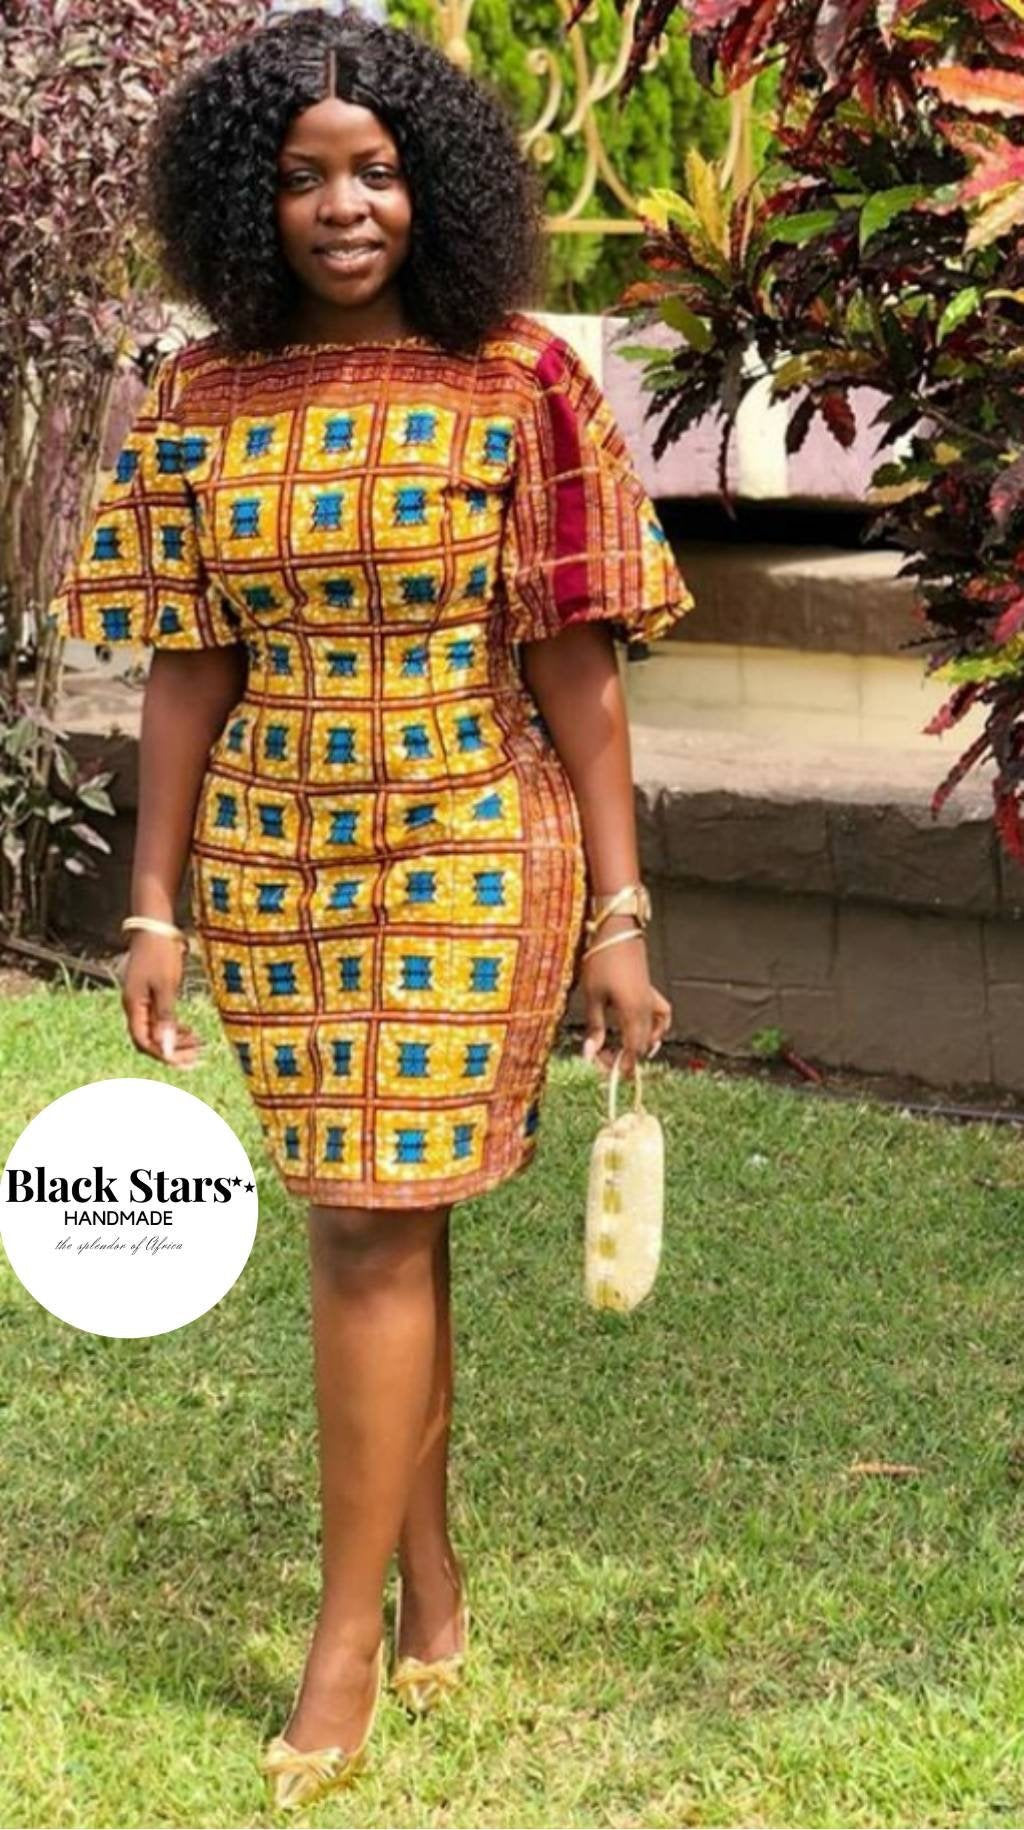 African Clothing for Women - African Clothing